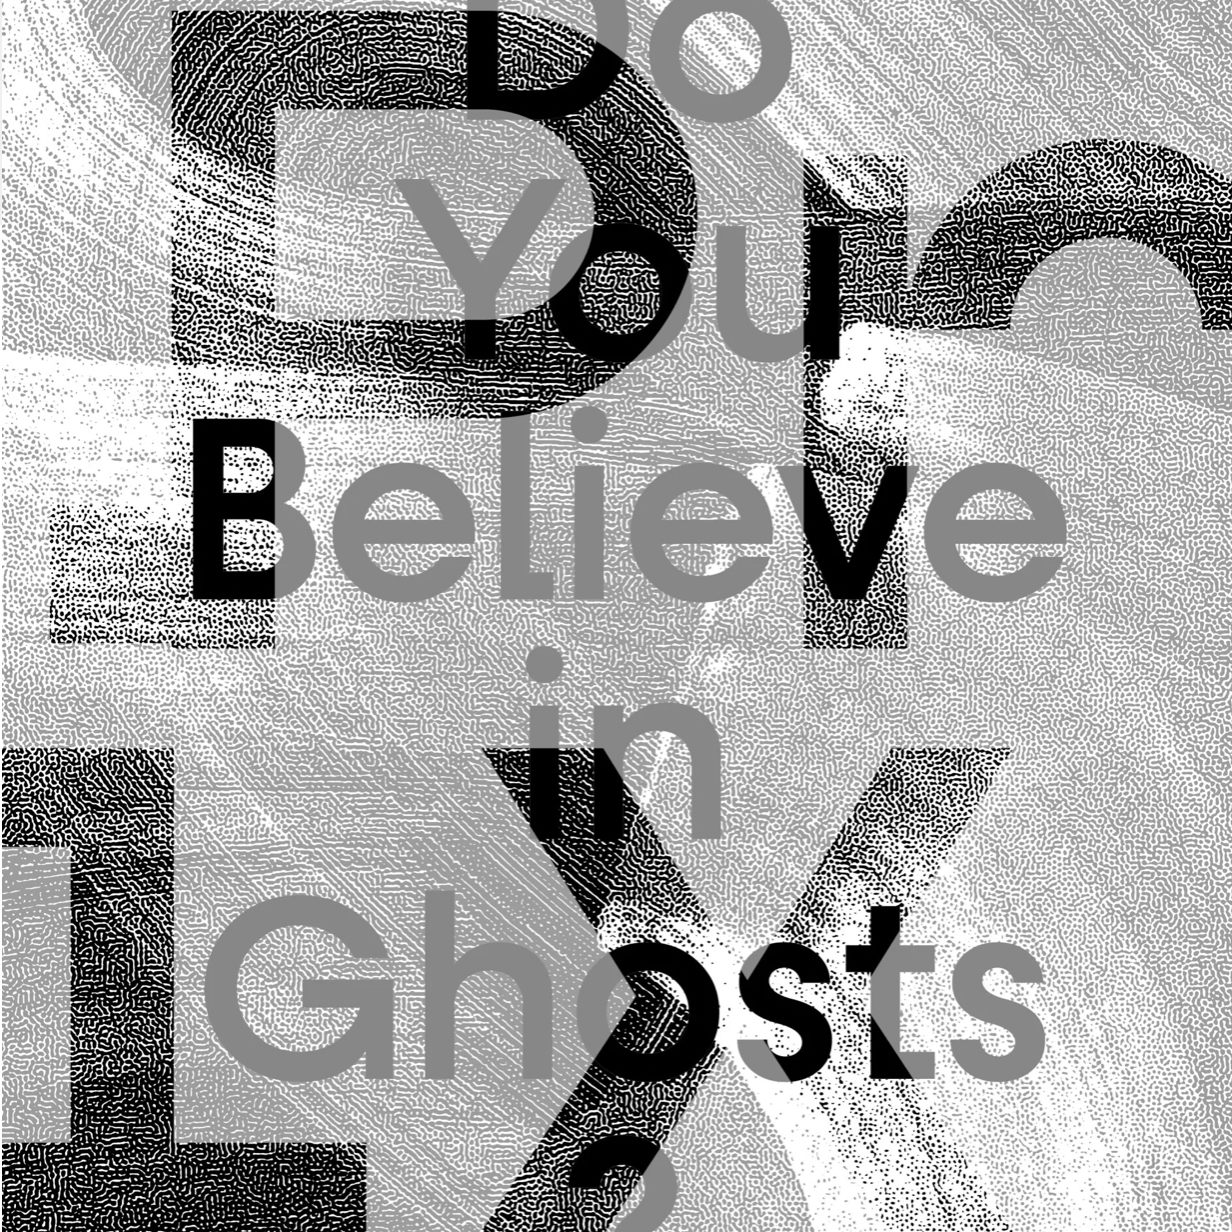 Do You Believe in Ghosts ?